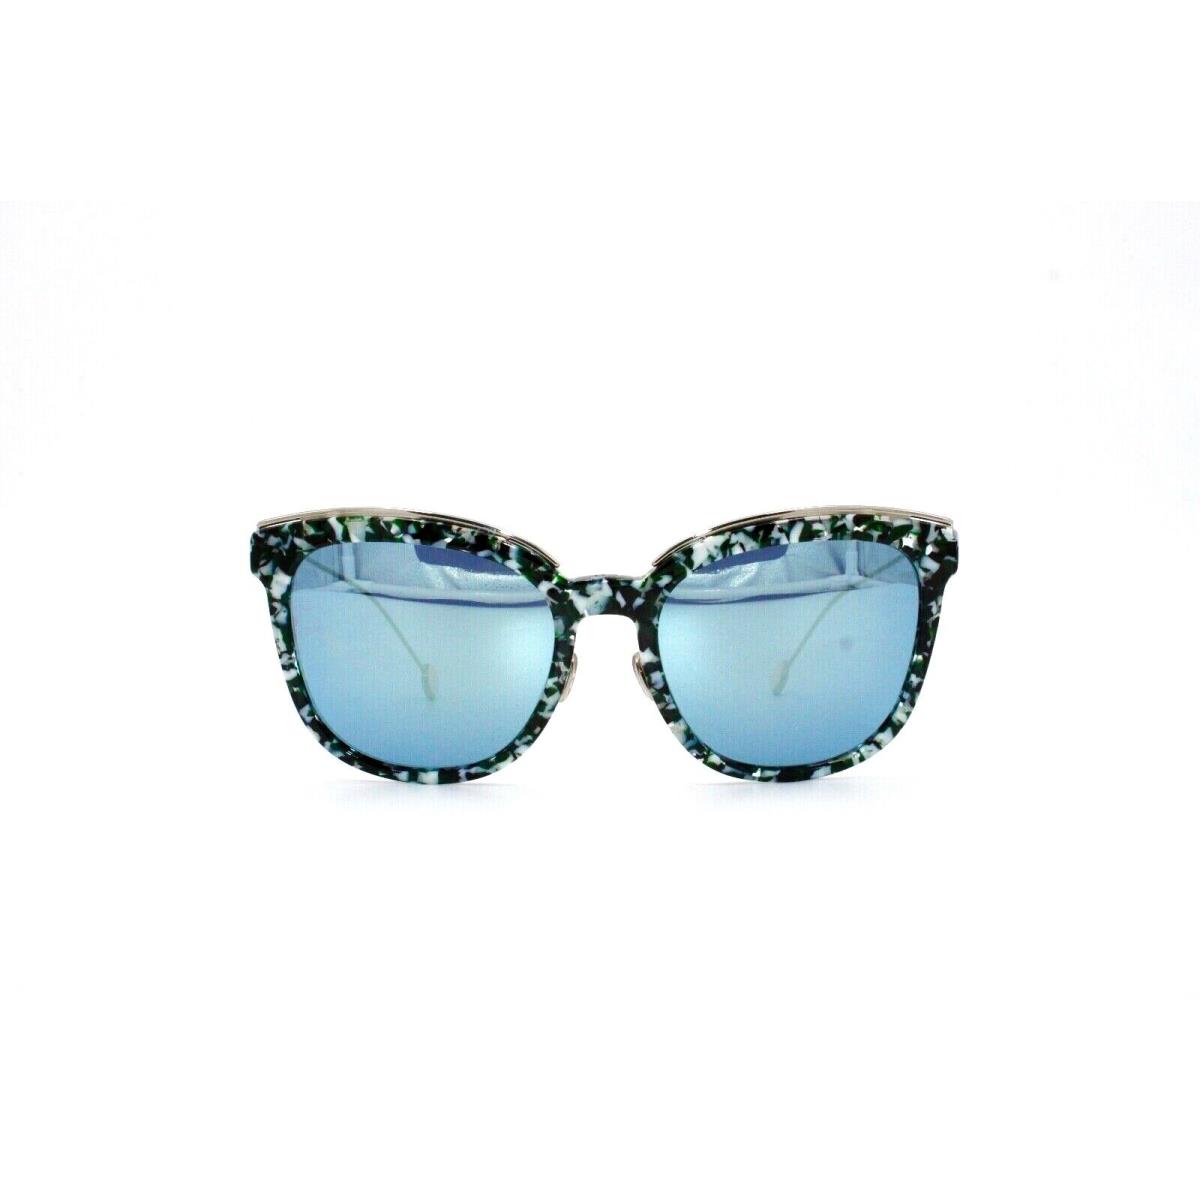 Dior Blossom F Sunglasses YE63J 54-19-145 Made in Italy HM3 - Silver Frame, Blue Lens